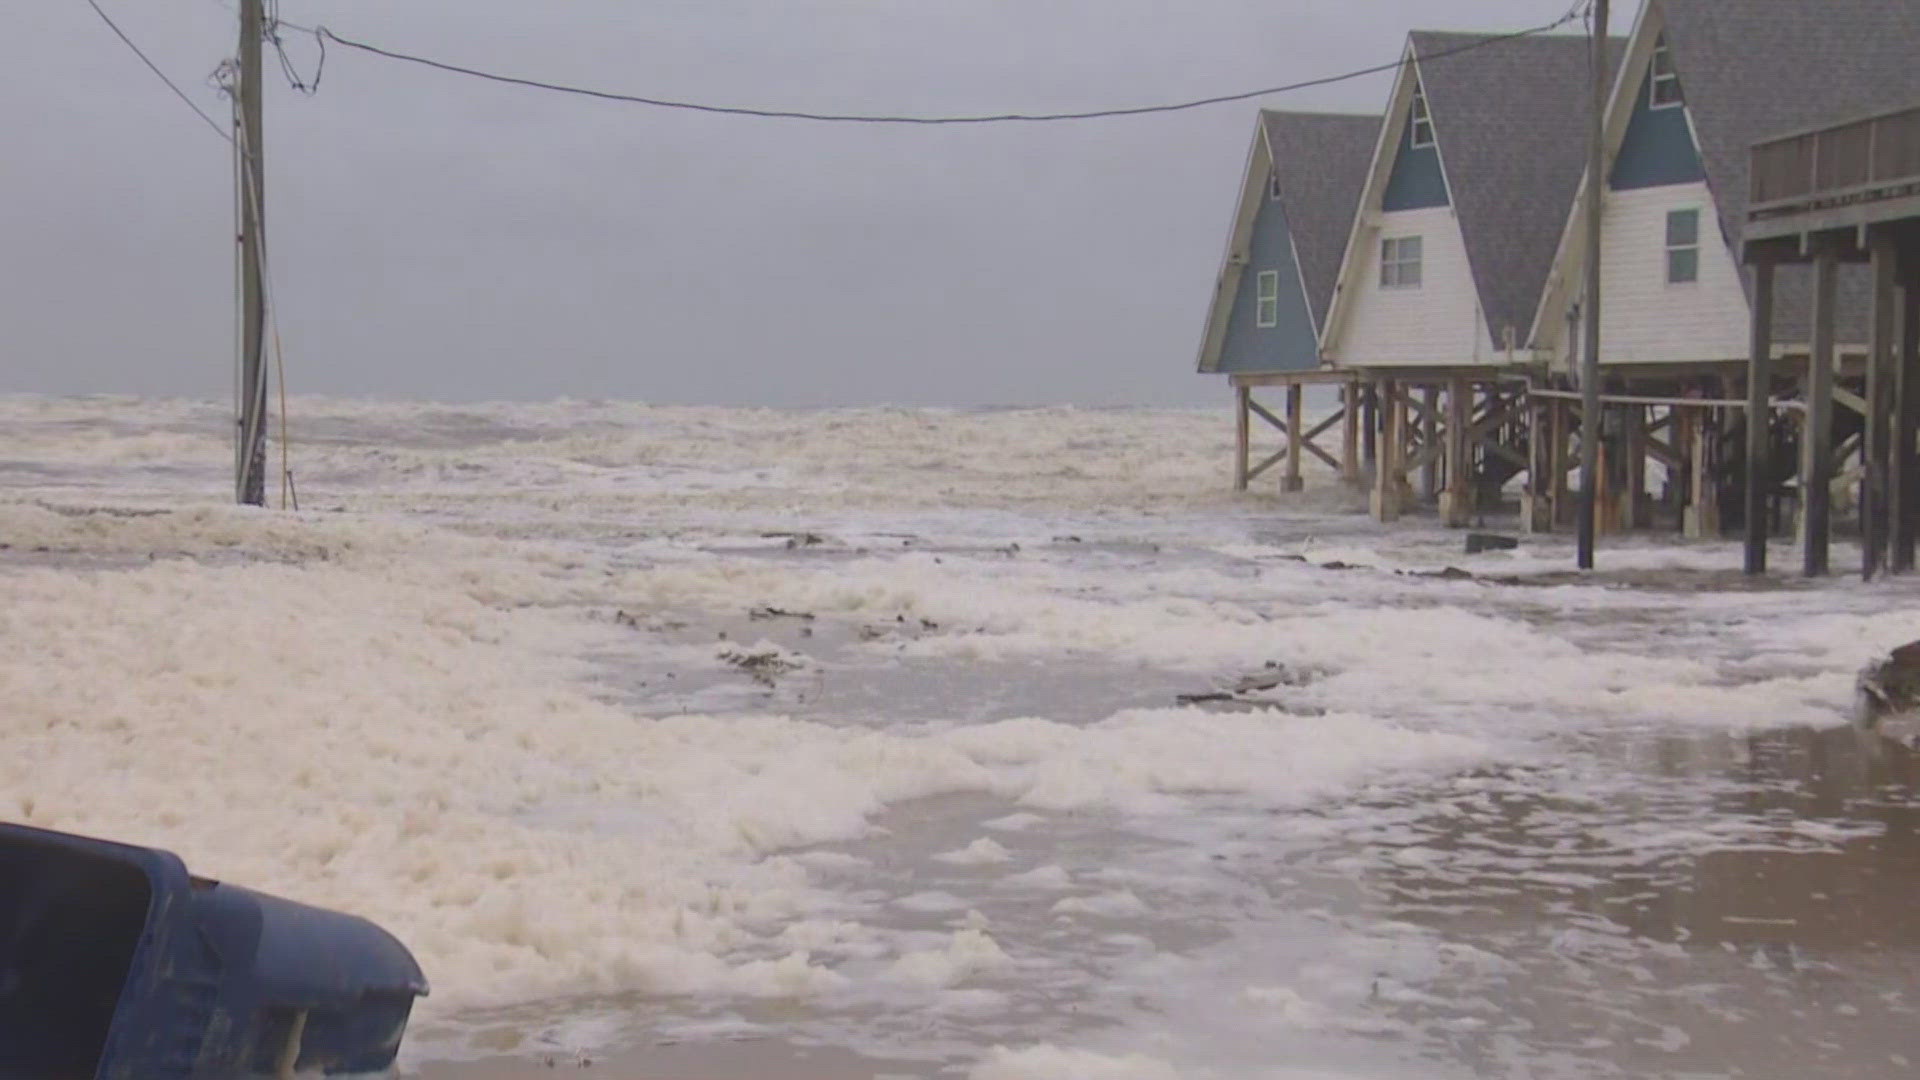 KHOU 11 has crews along the coast tracking the impacts from the storm in the Southern Gulf of Mexico.